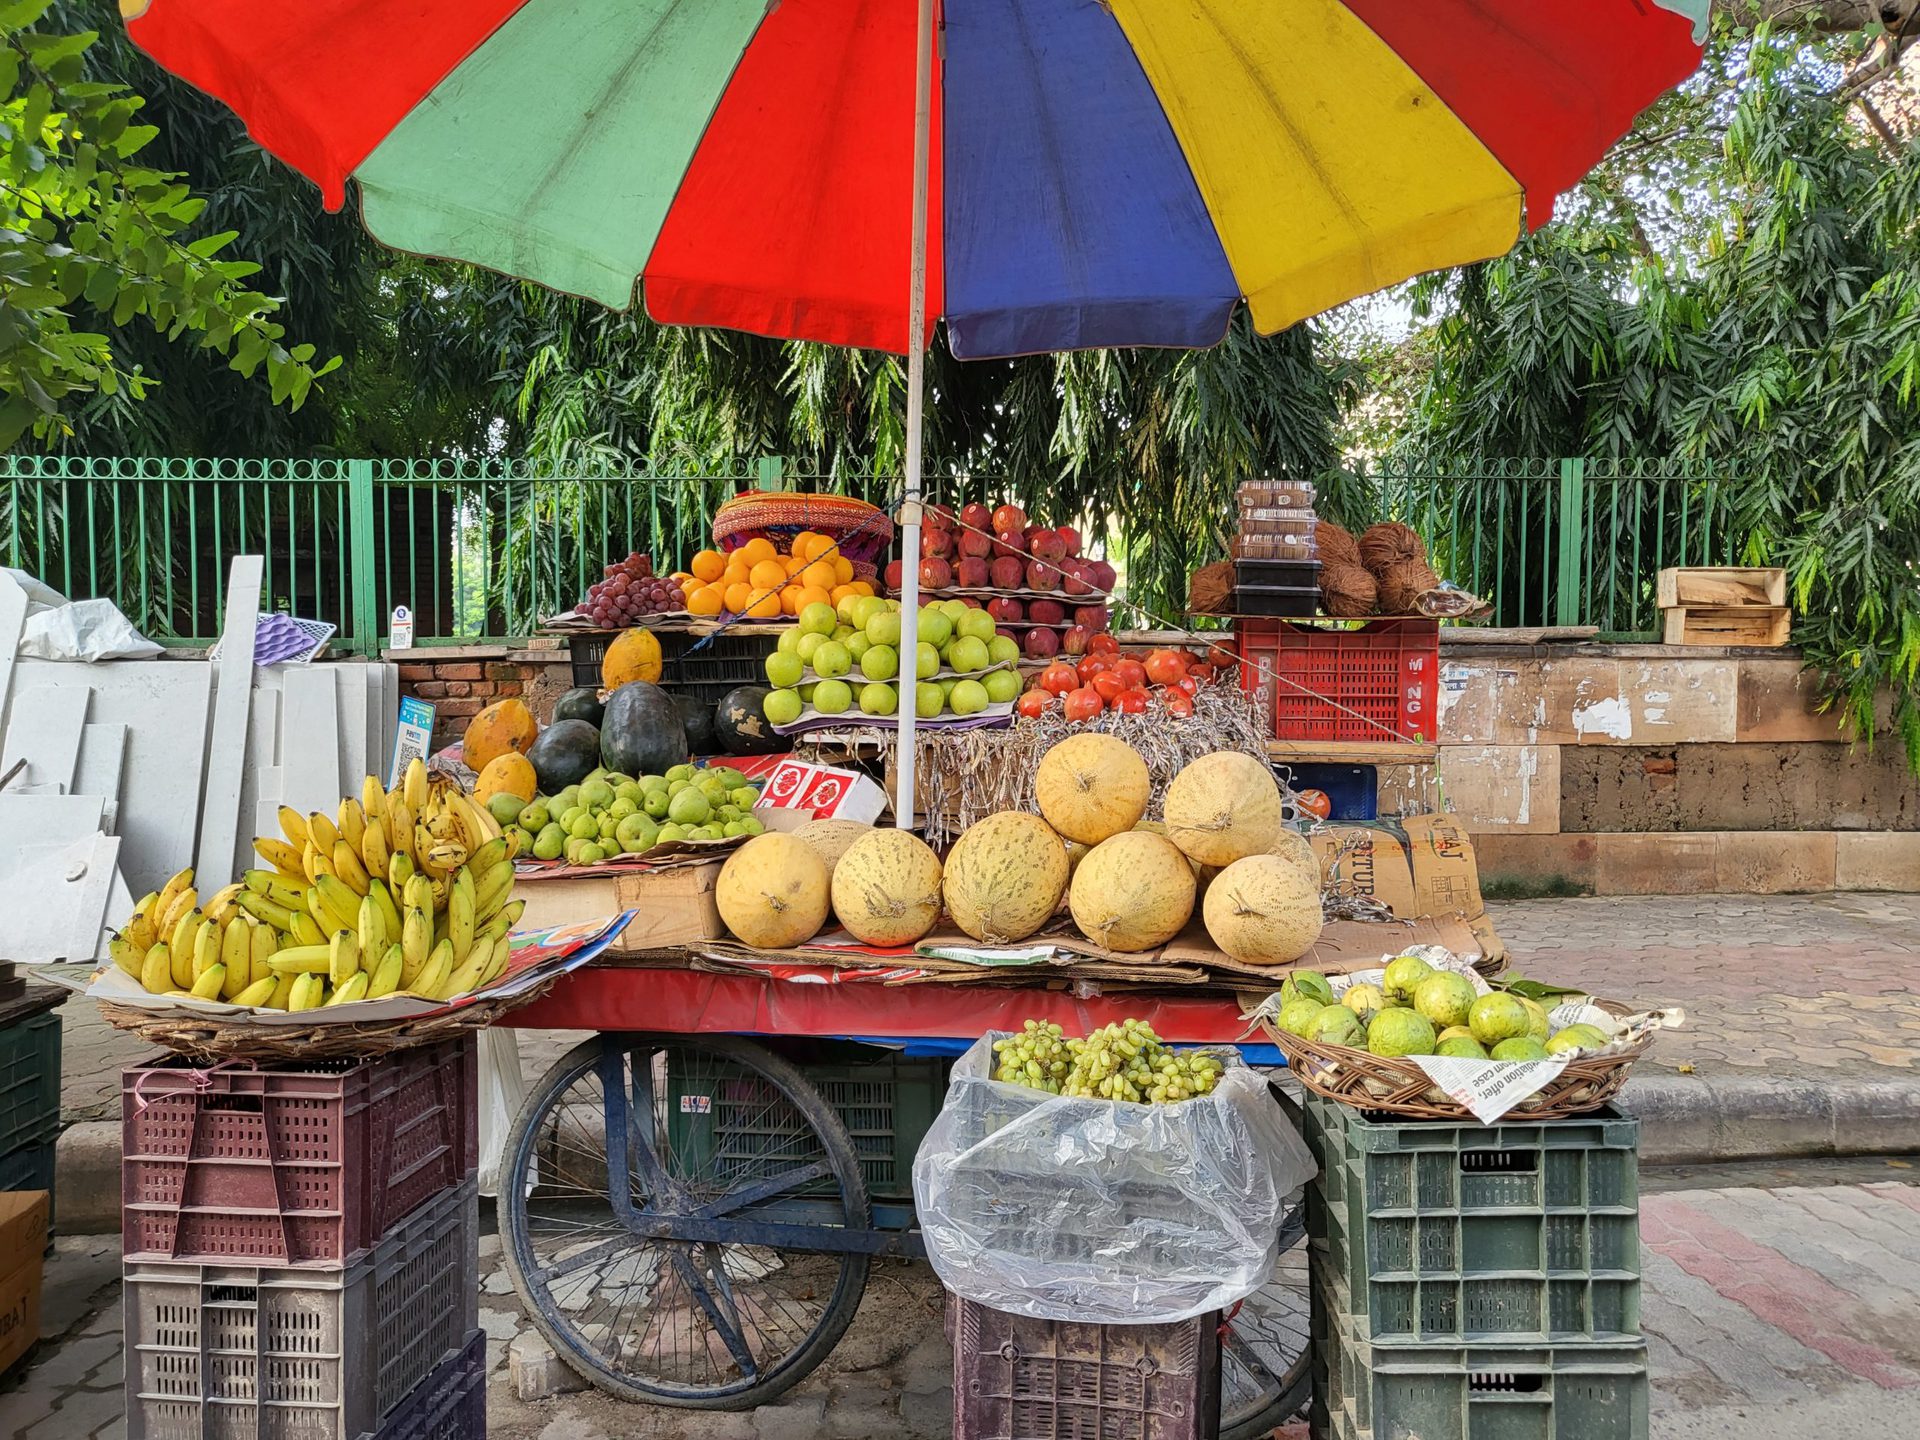 Samsung Galaxy Z Flip 3 primary camera fruit seller stand with fruit and a colorful umbrella